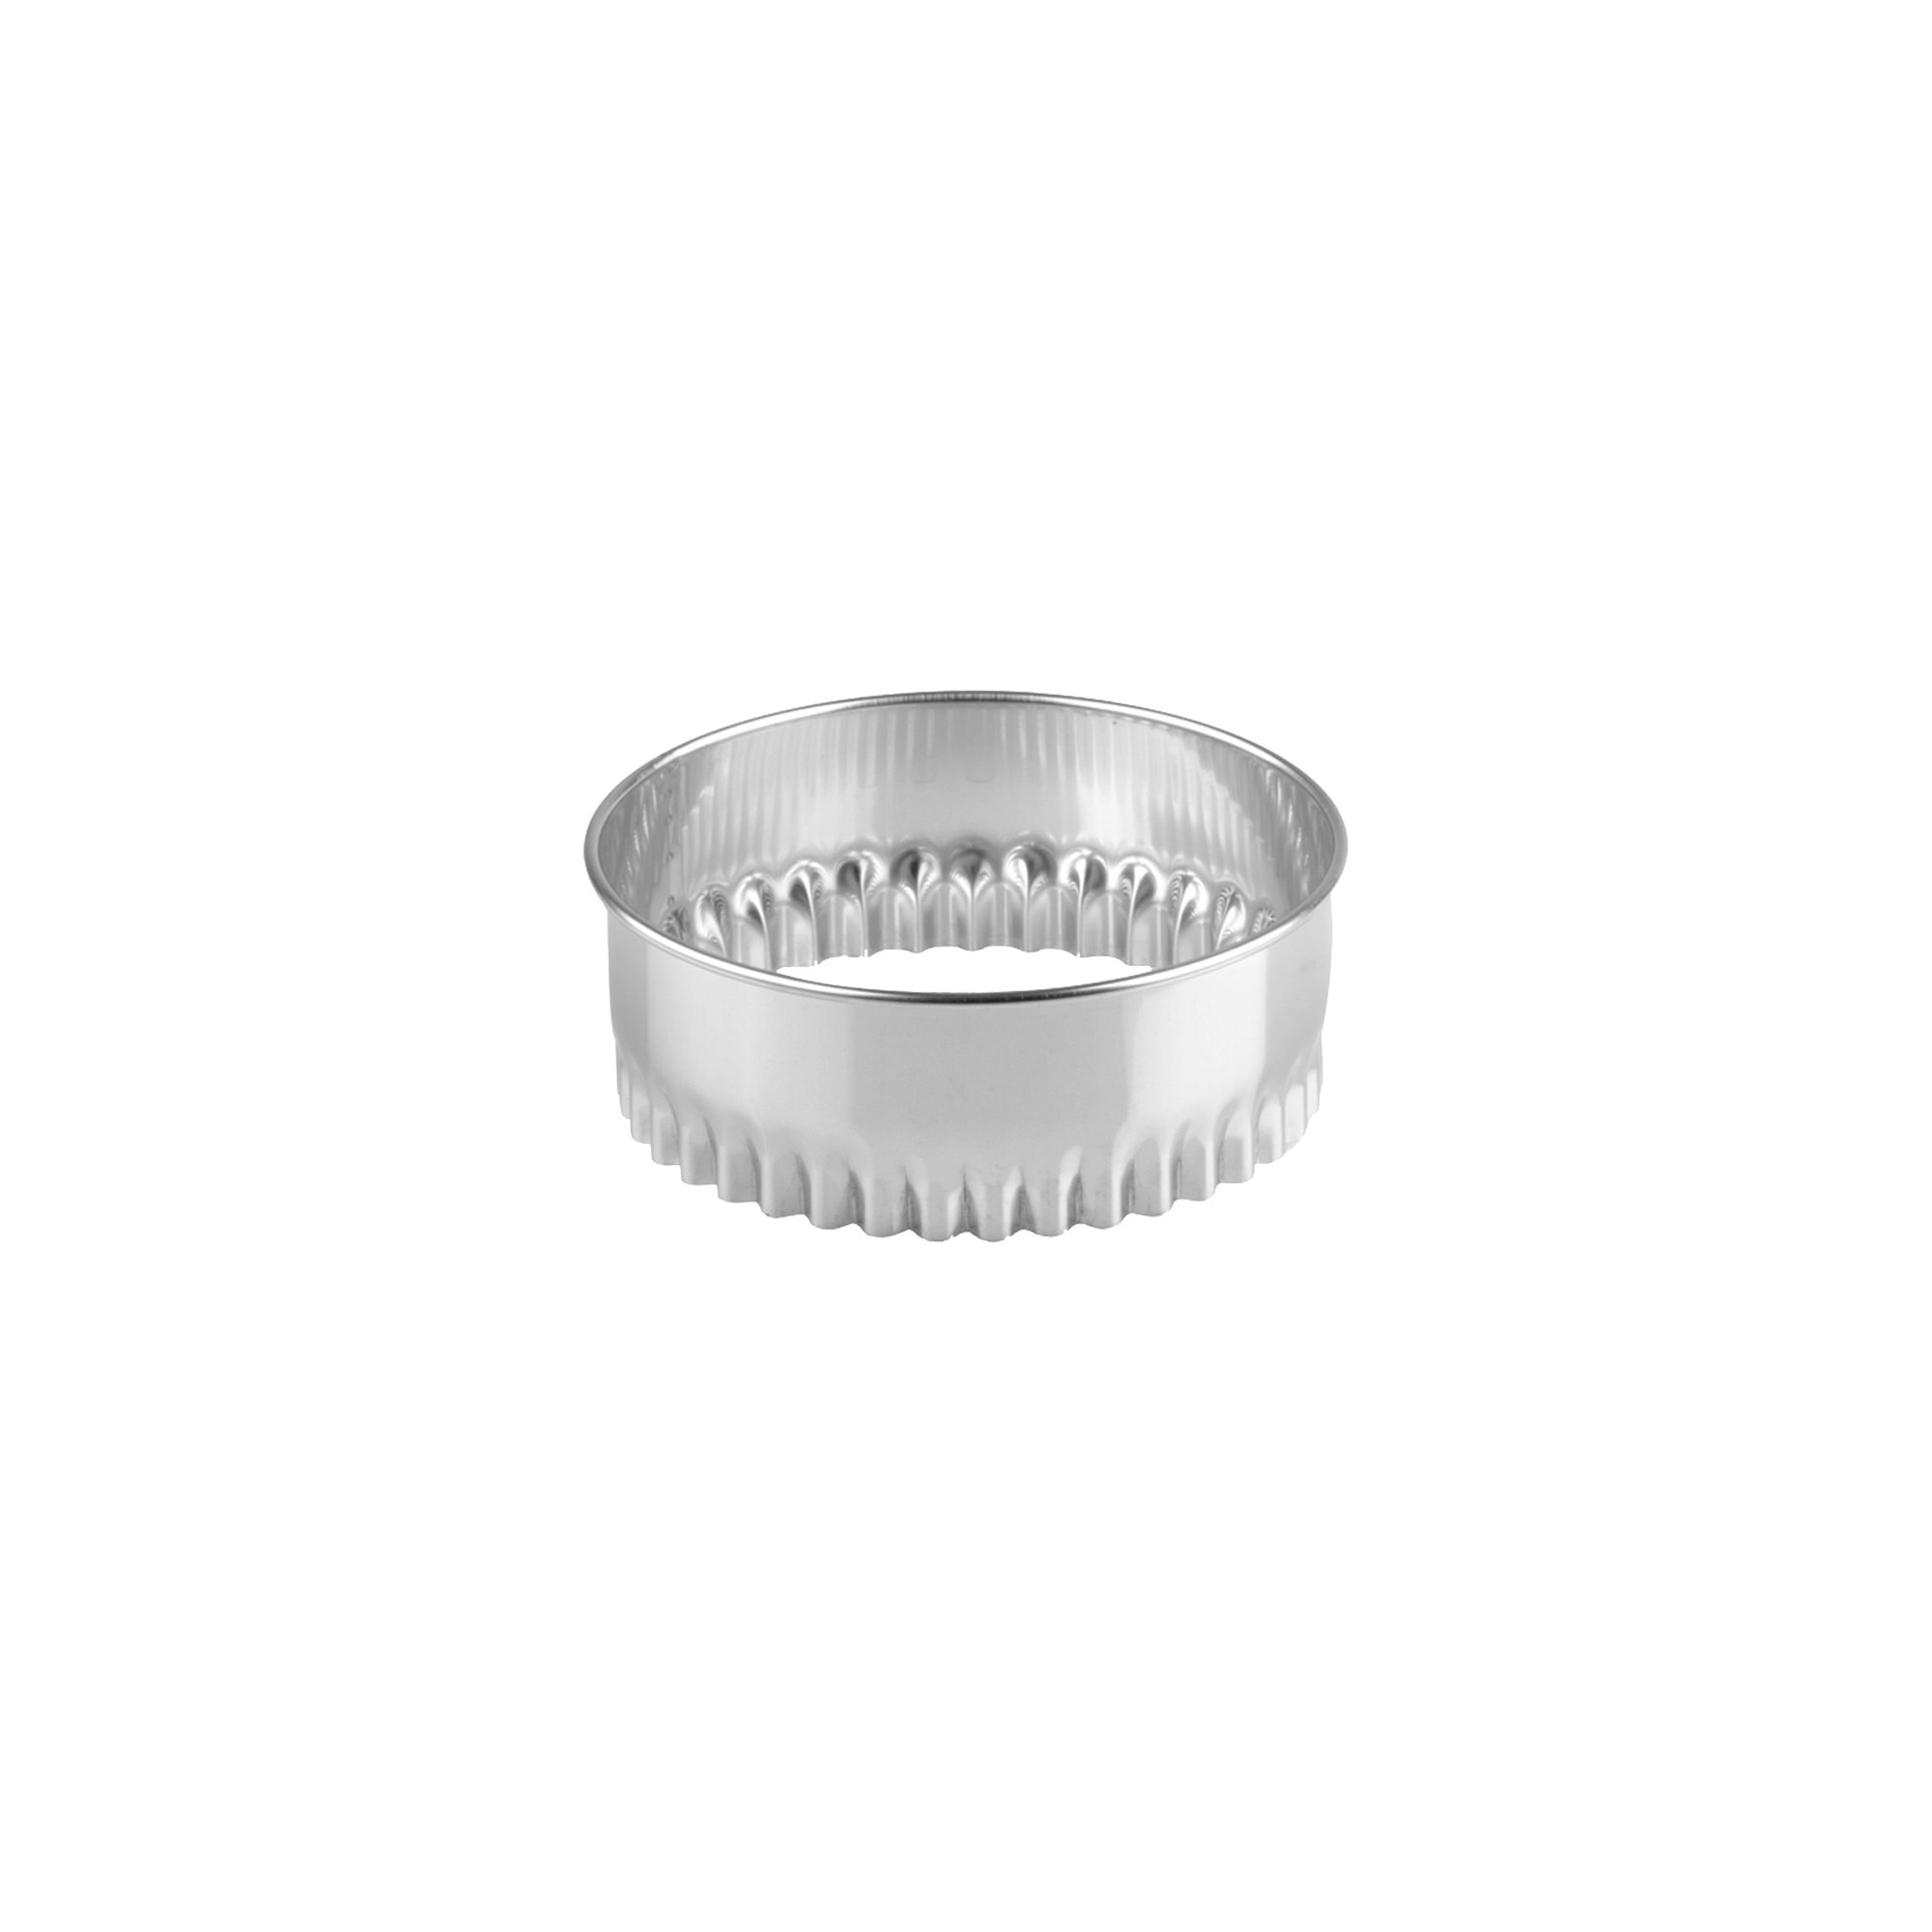 Chef Inox Crinkled Biscuit Cutter 11cm Image 1